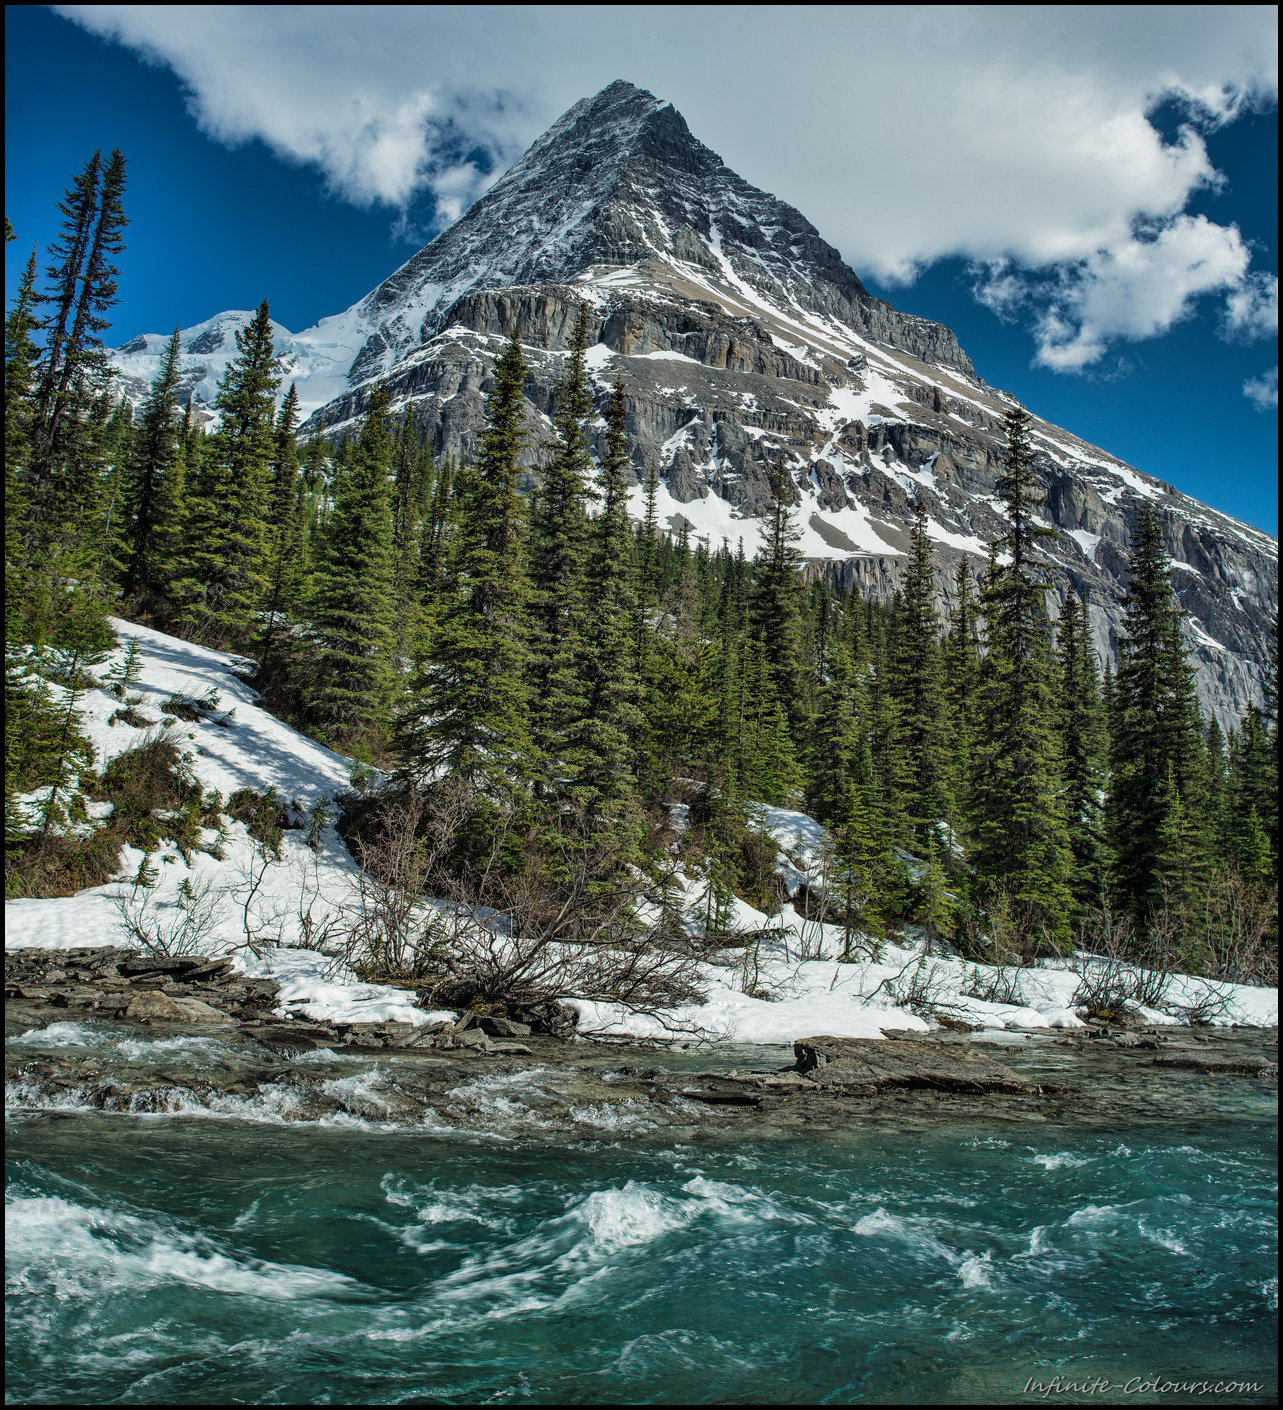 Mighty Robson as seen from Emperor Falls campsite on Berg Lake Trail, stitch Panorama